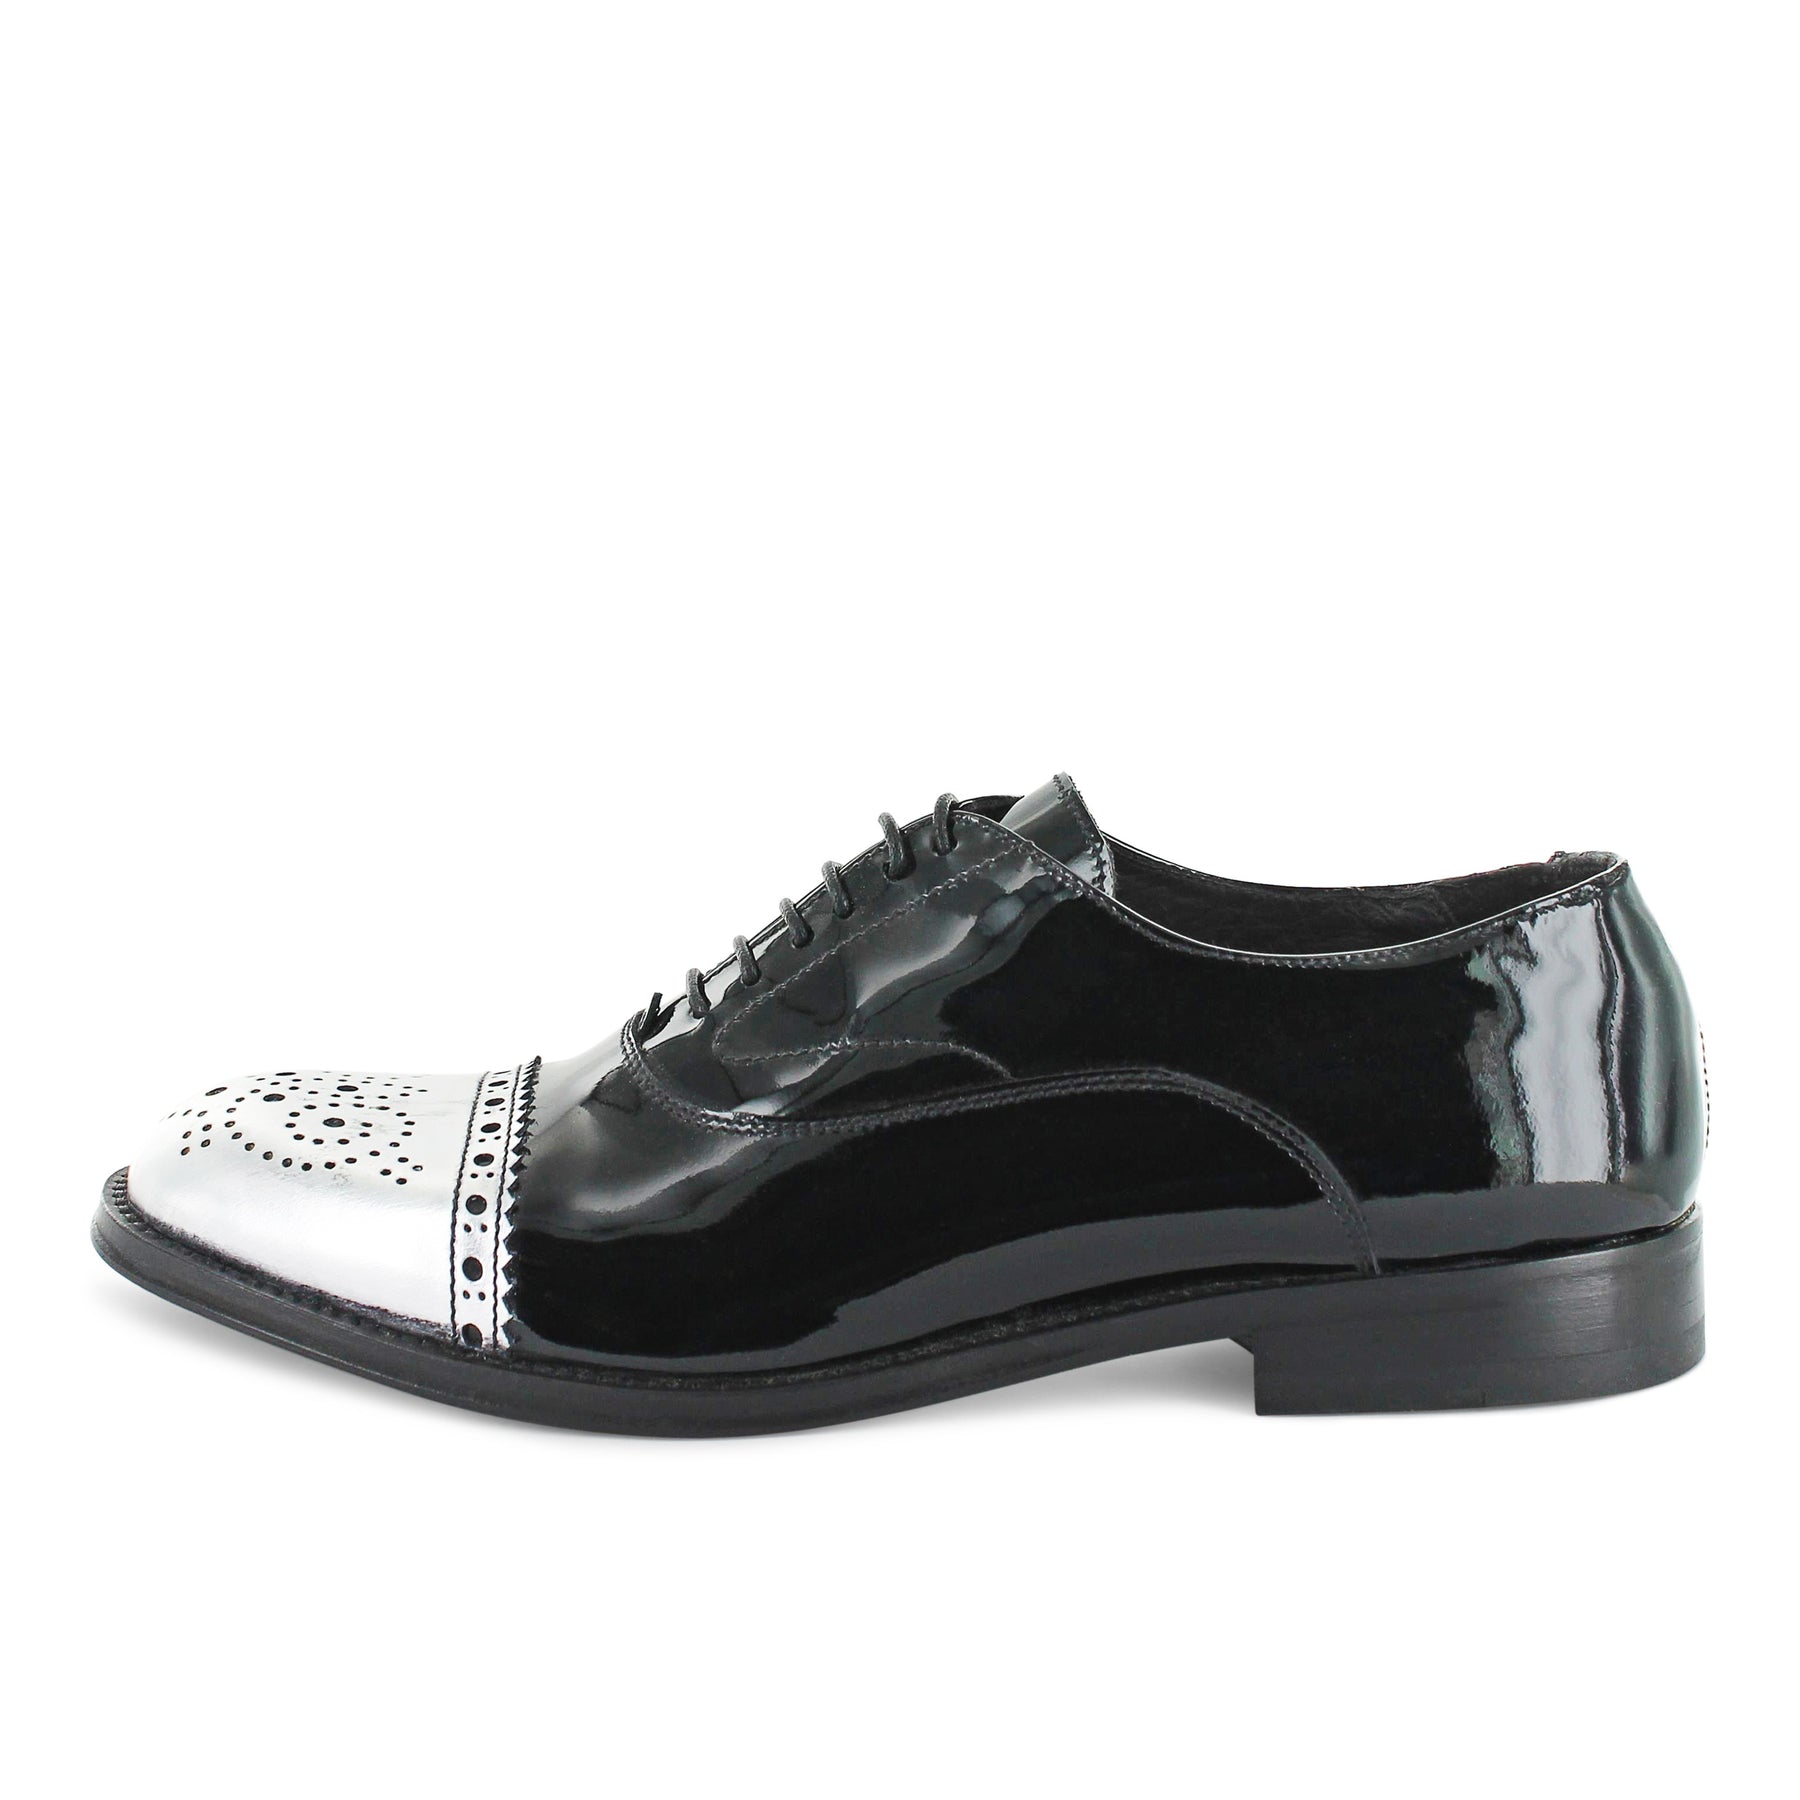 15537 - Black Brogue With Silver Fringe